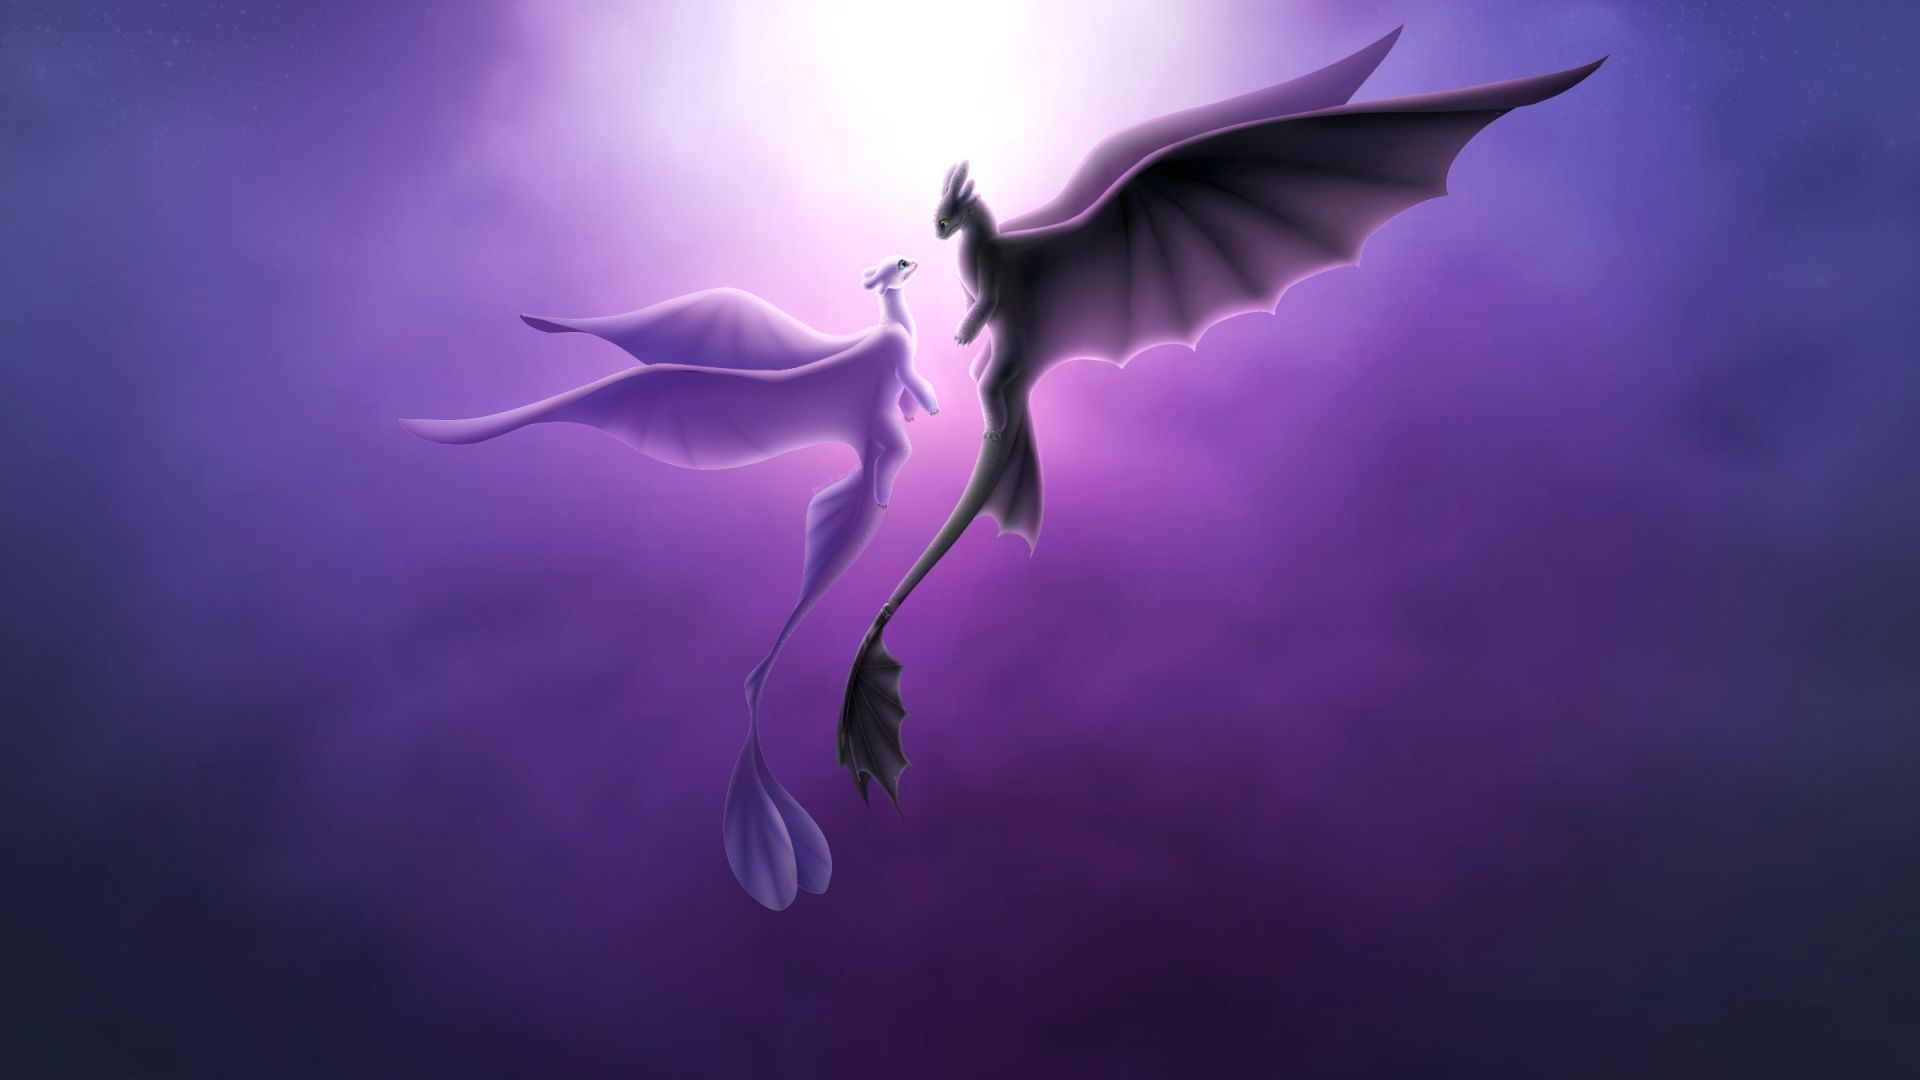 Toothless and light fury, romantic, love, dragons wallpaper, HD image, picture, background, 263Dfe